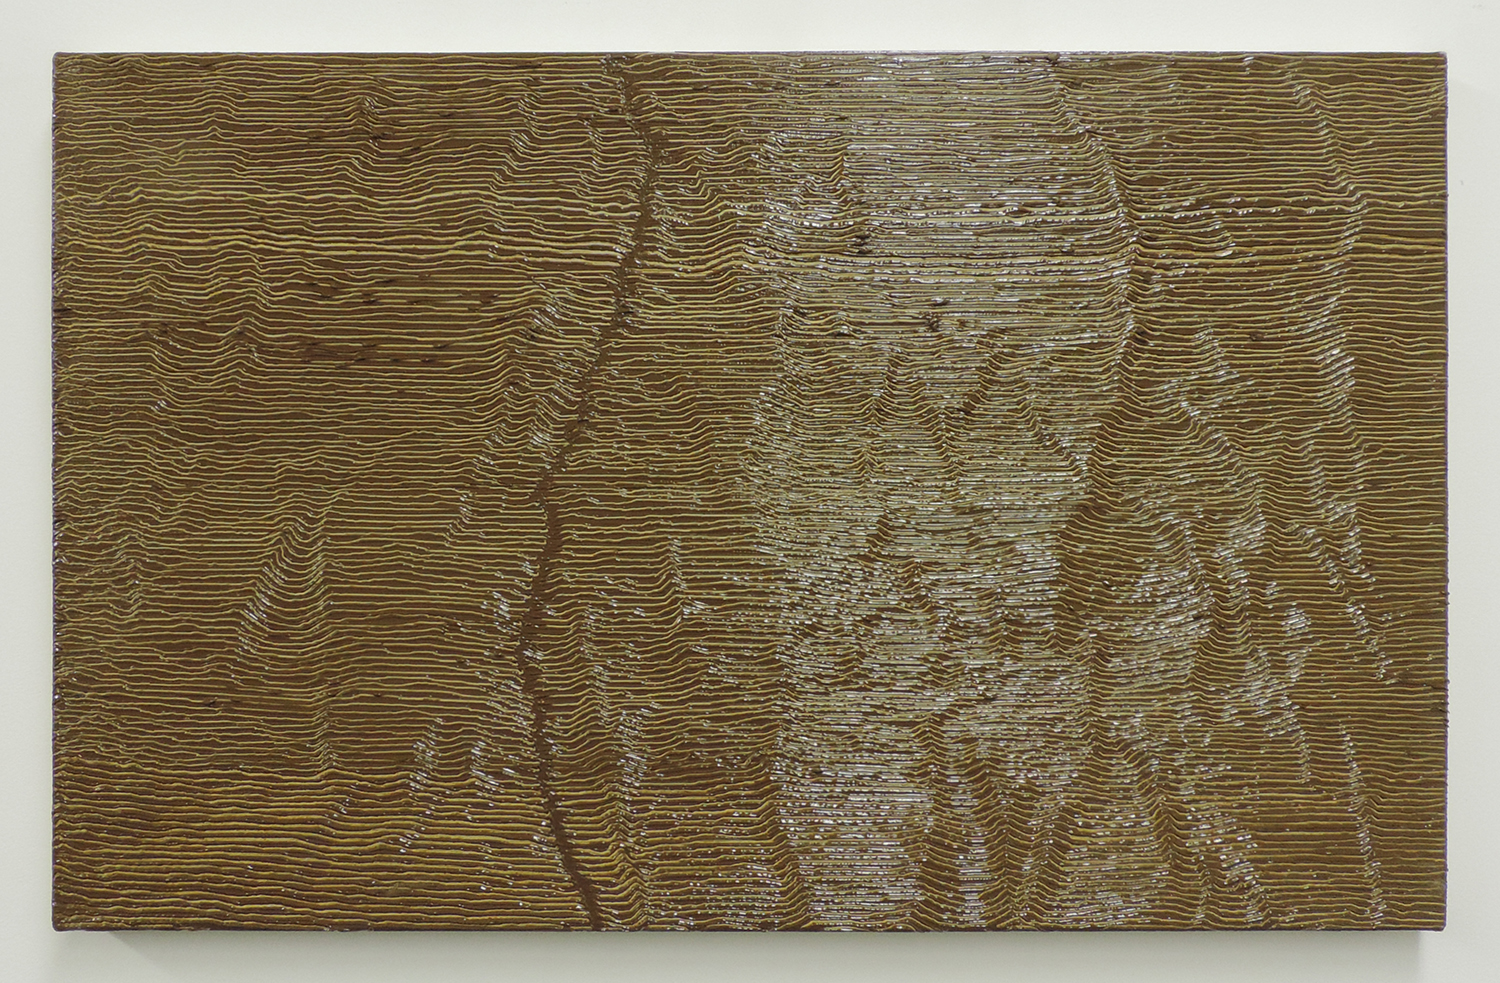 Fissure 2<br>Oil and Amber on canvas over panel｜33.7 x 53.4 cm, 2001